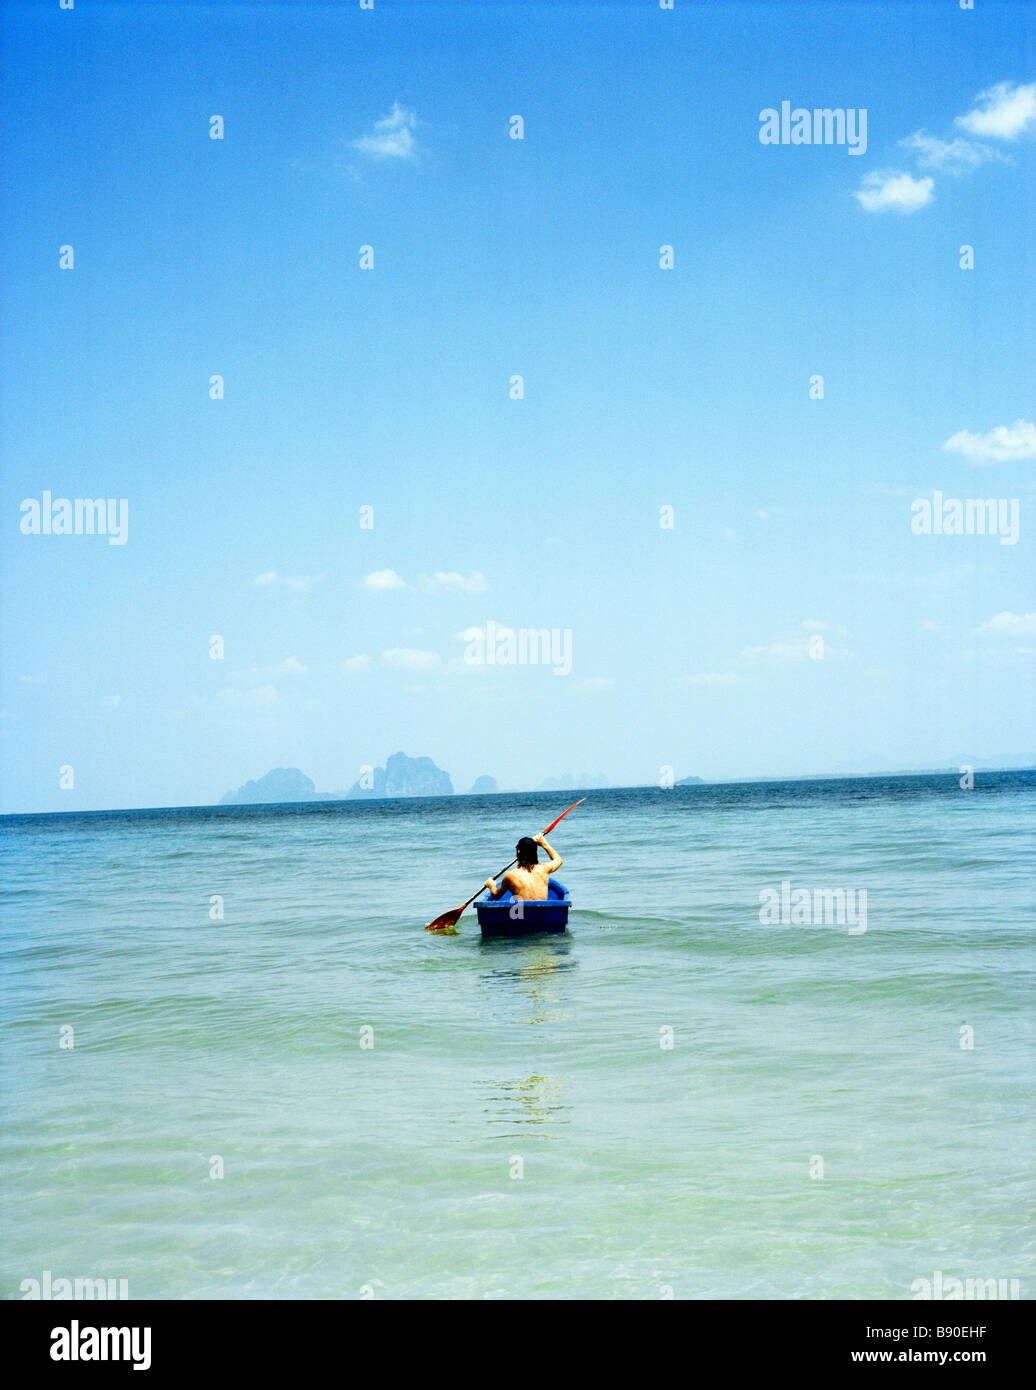 A man in a small boat on the blue sea Thailand. Stock Photo